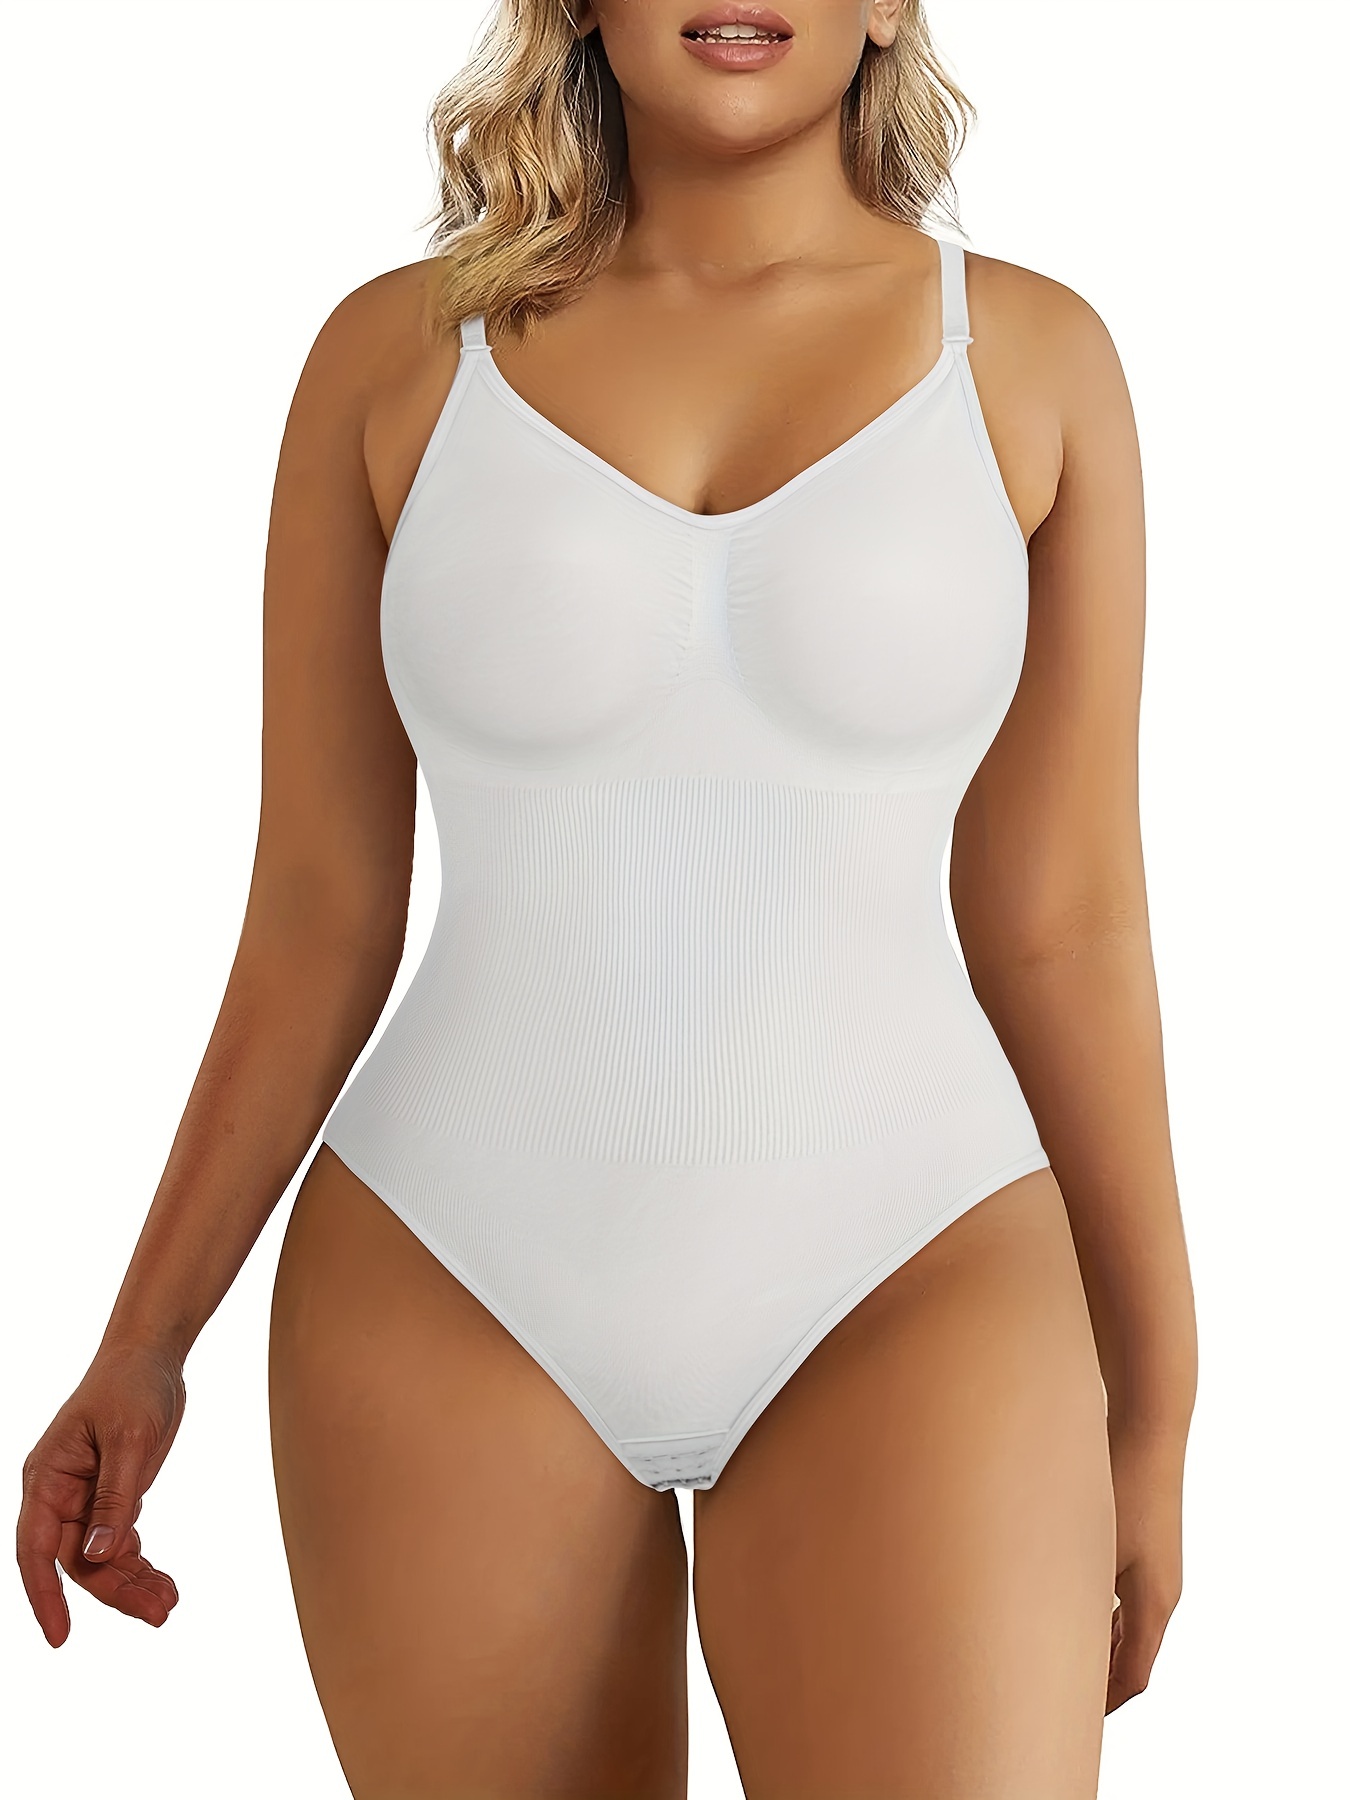 Body Shaper Slimming Device for Women Use Plus Size Shapers High